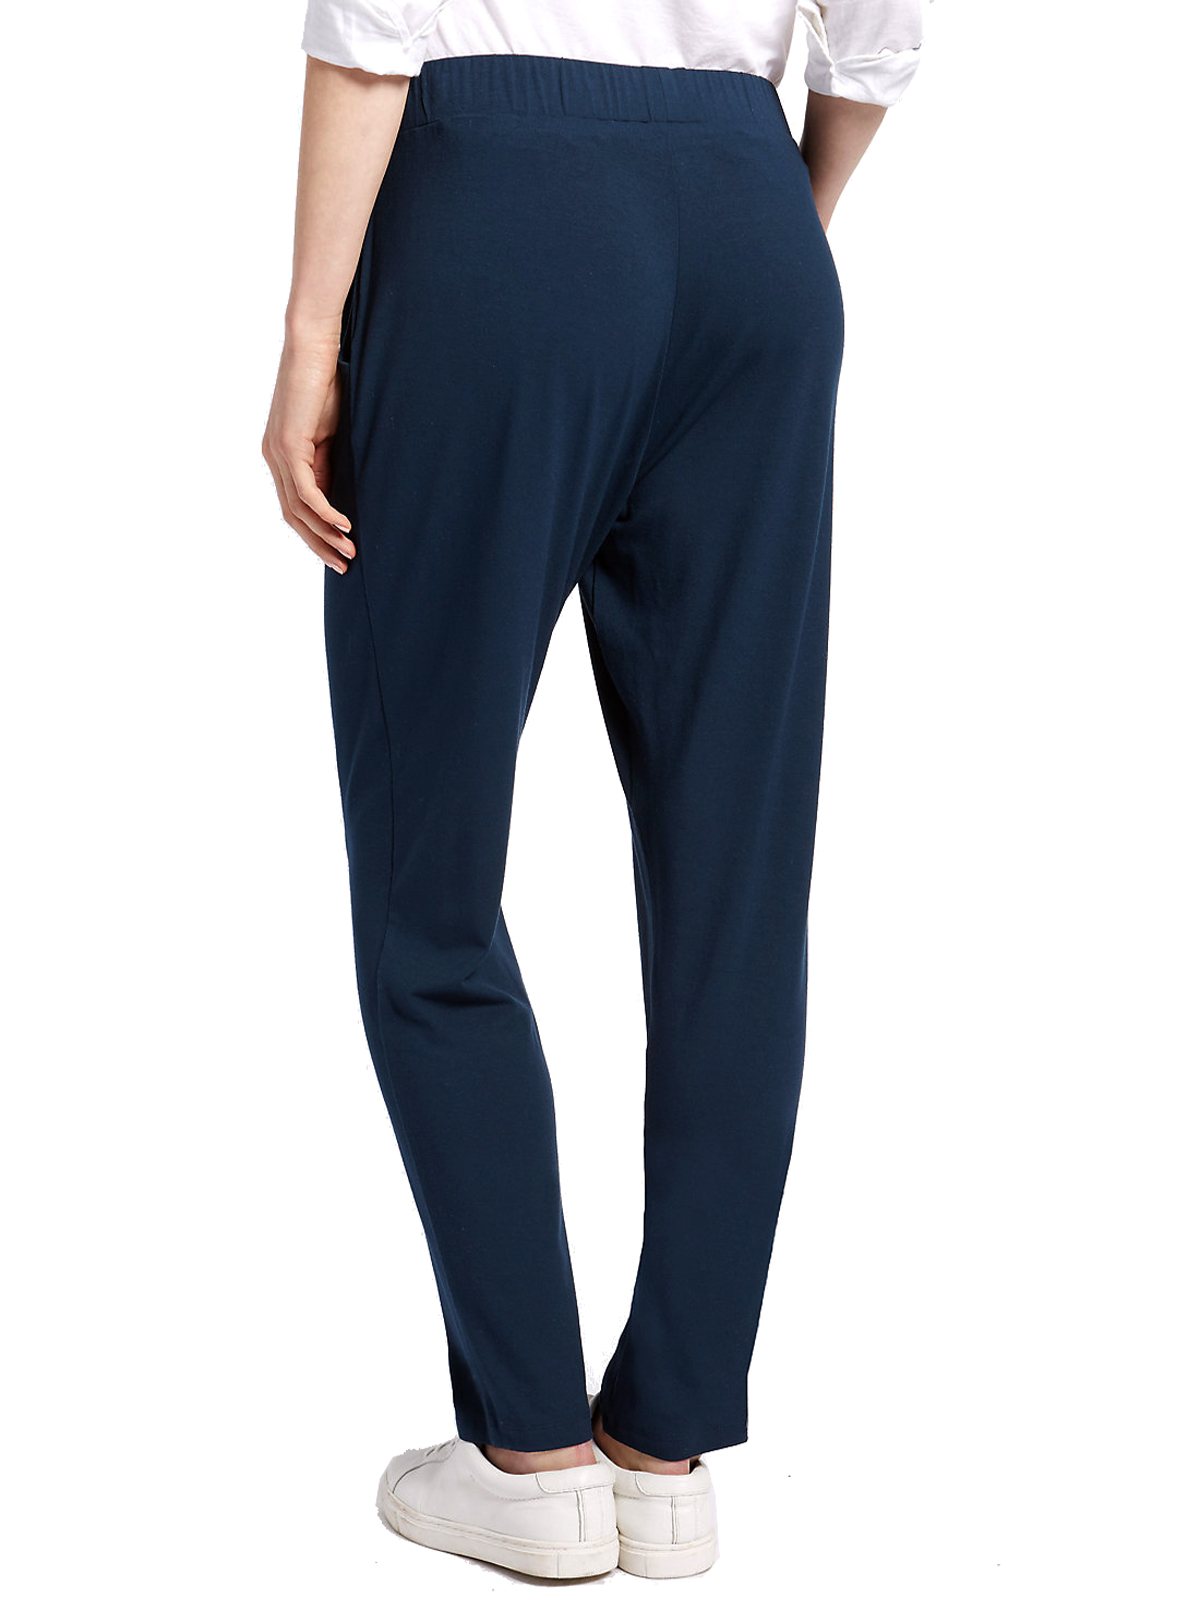 Marks and Spencer - - M&5 NAVY Pull On Tapered Leg Trousers - Plus Size ...